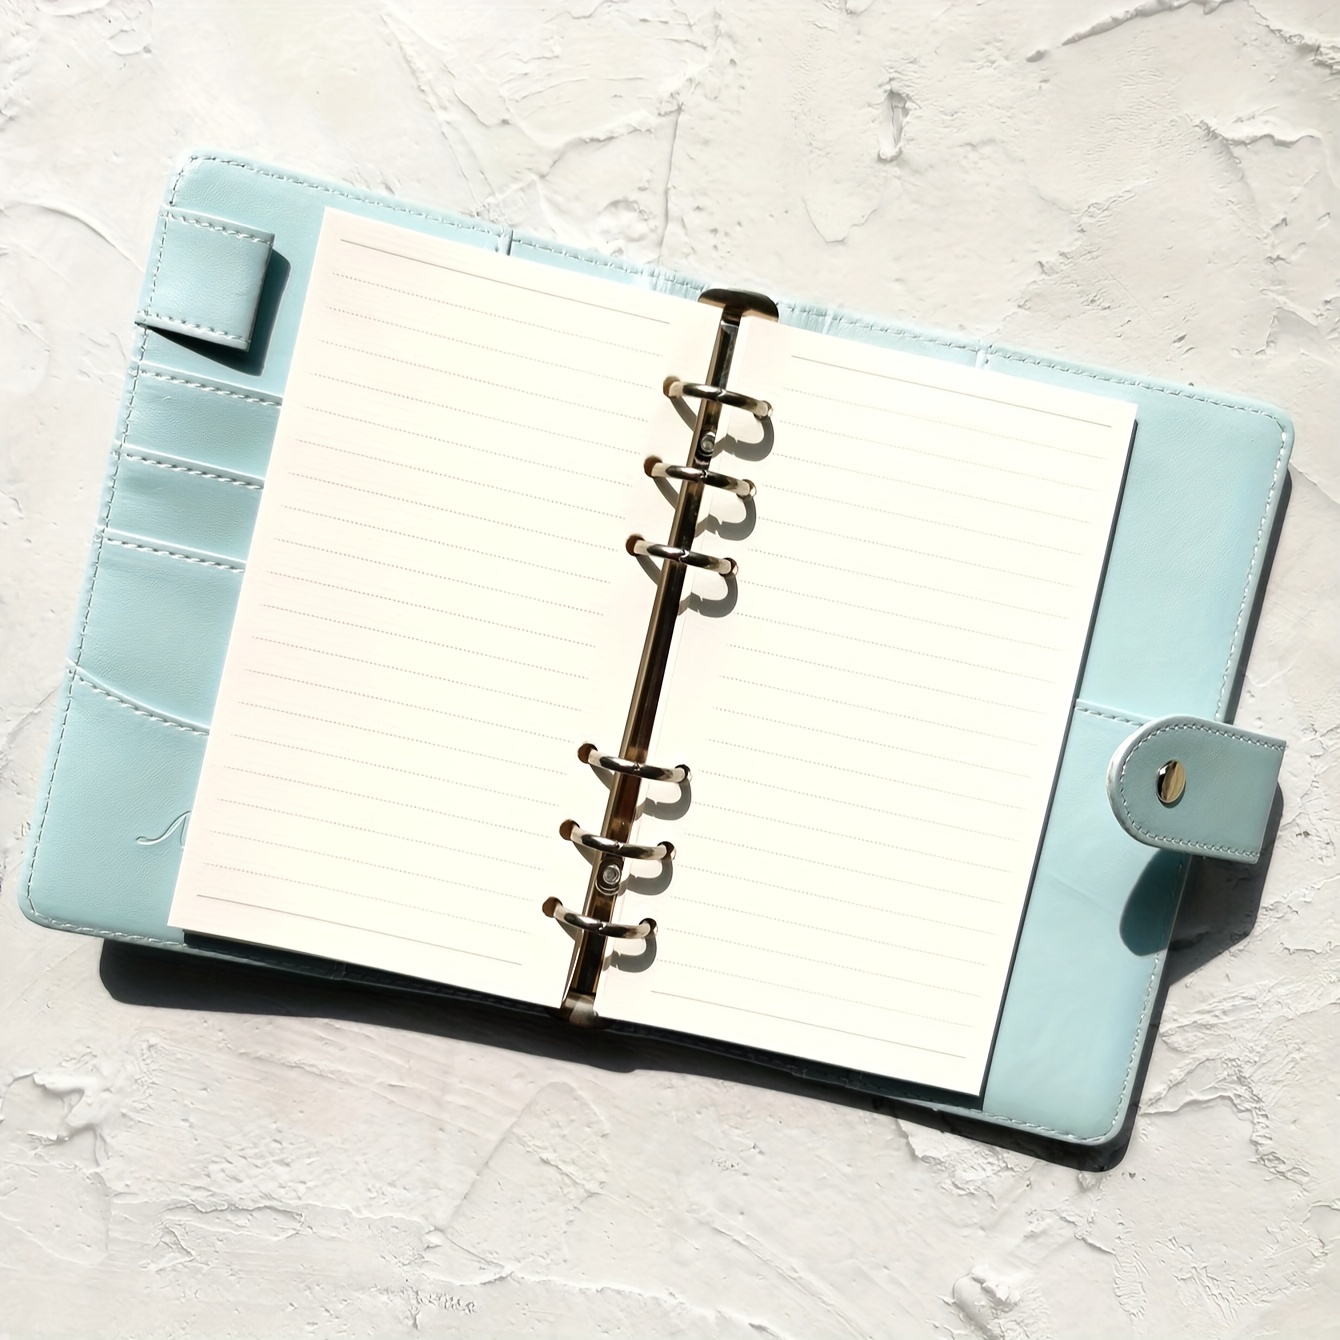 6 Ring Binder Journal Size Guide: A5 vs A6 vs A7 6 Ring Binder Journals 